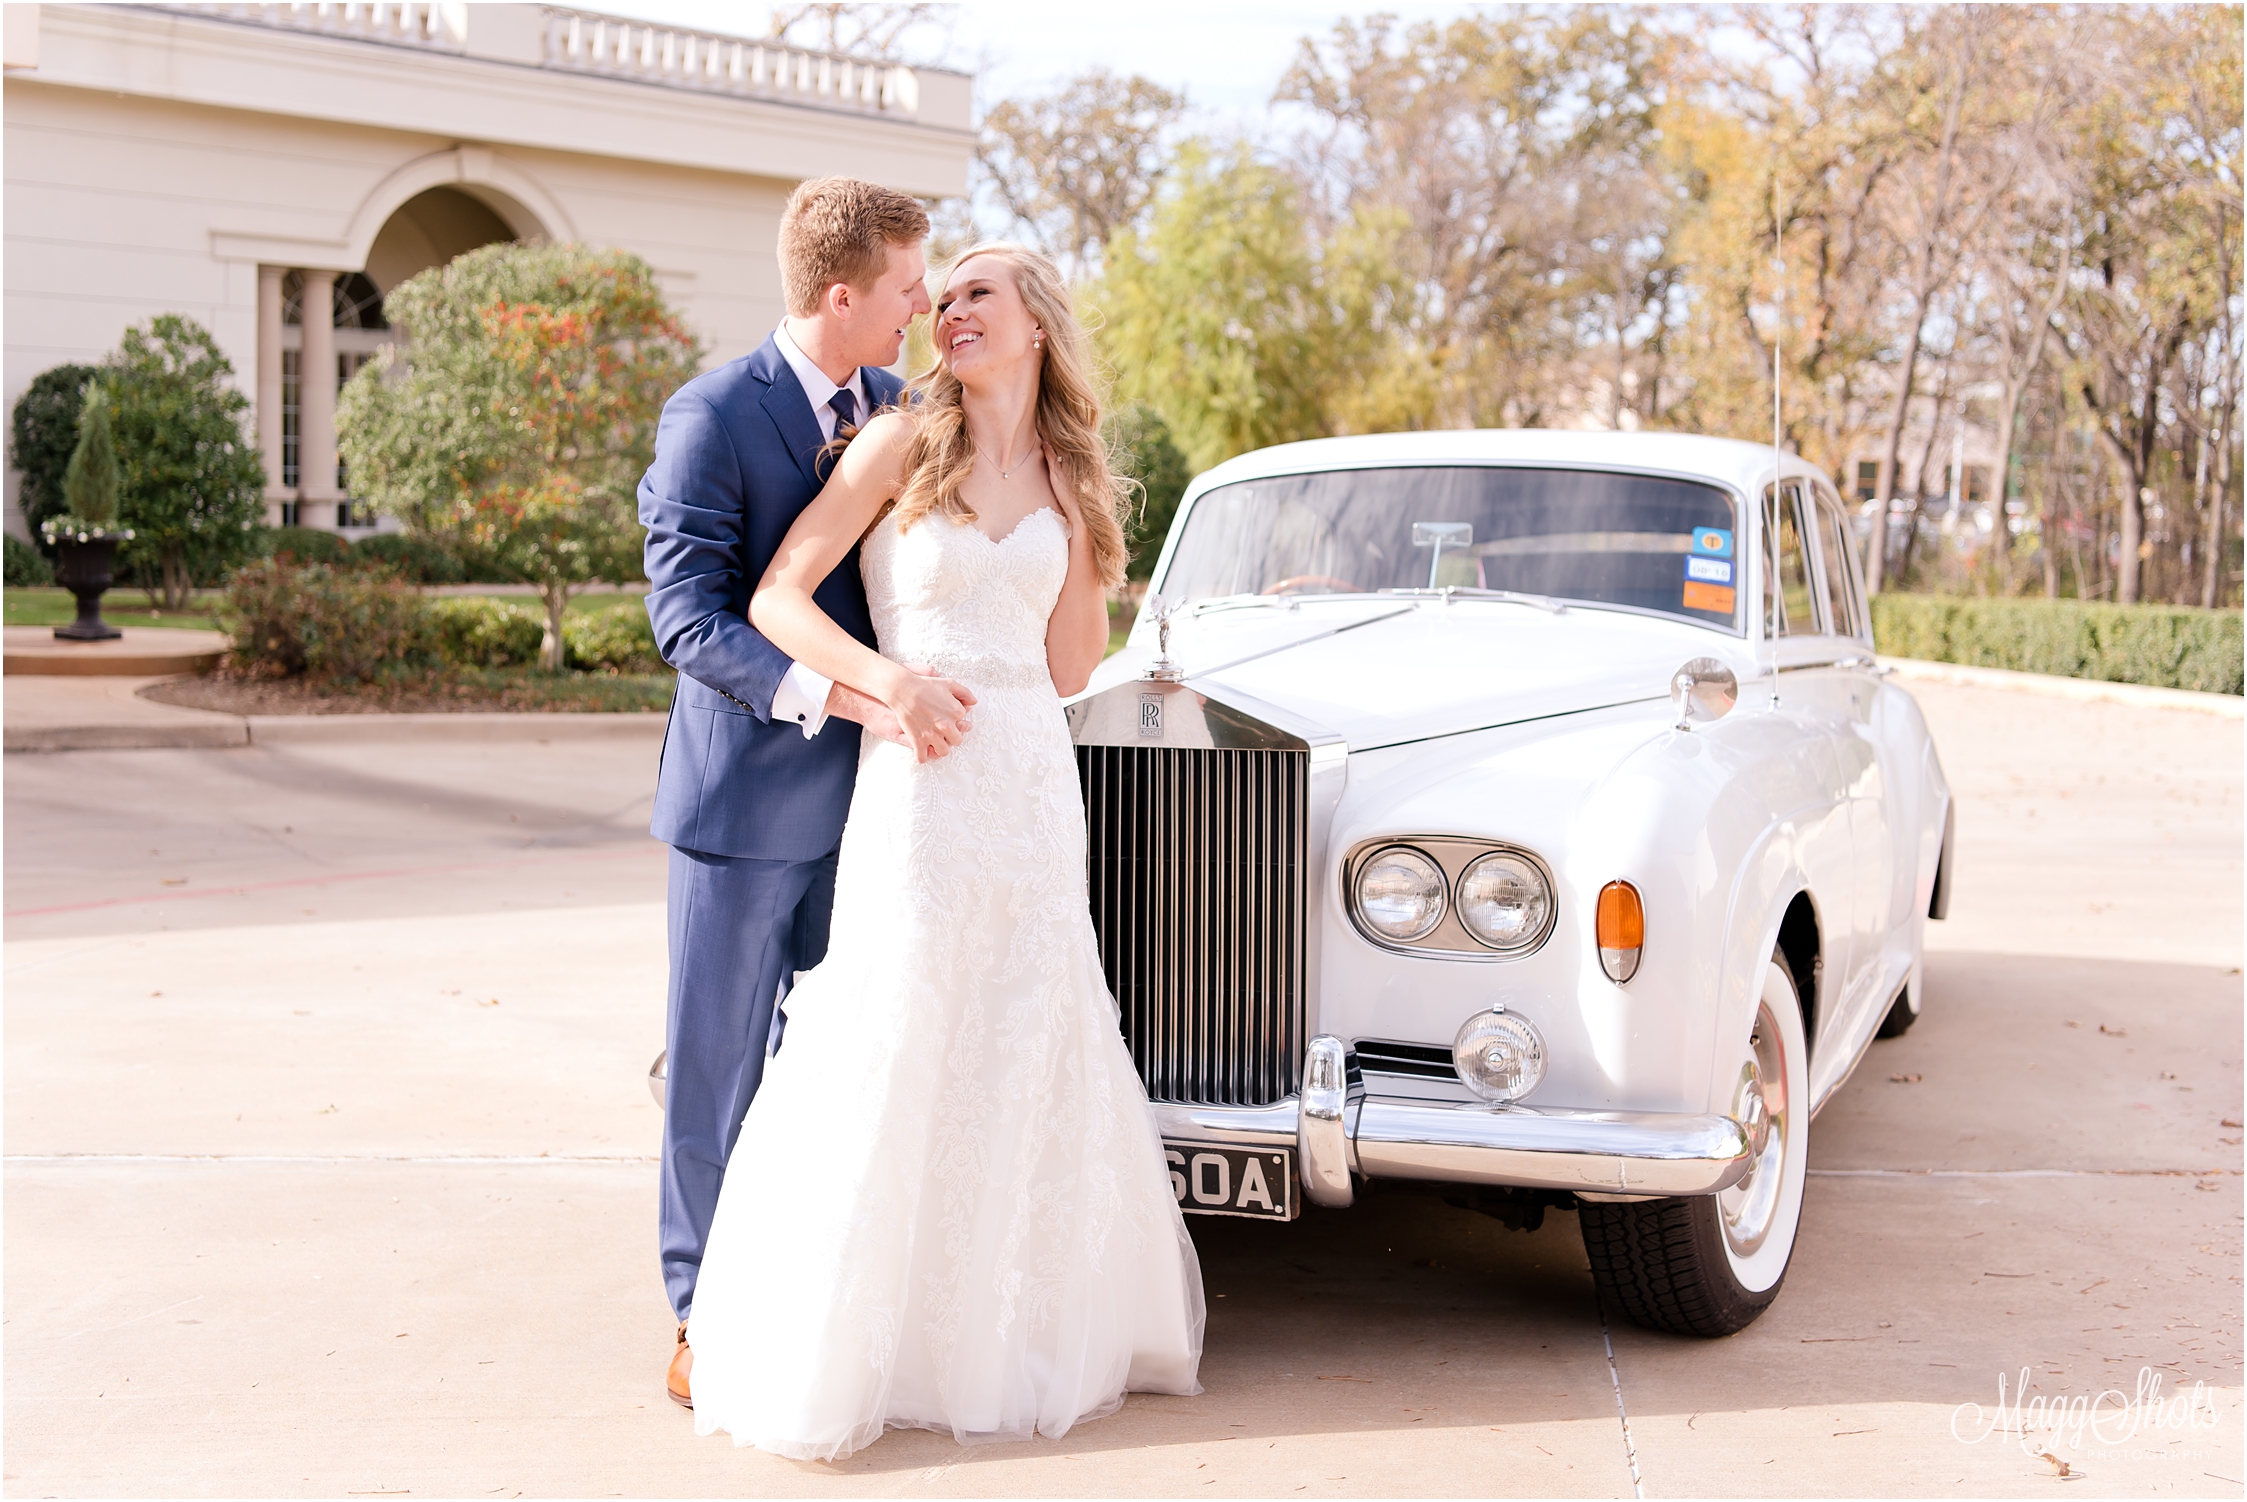 Bridal, Portraits, Bouquet, Ring, Bling, Professional Photography, Professional Photographer, Wedding Photographer, Destination Wedding Photographer, Love, Bride and Groom, Wedding Dress, Ashton Gardens, MaggShots Photography, MaggShots, Happy, Family, Kiss, Smile